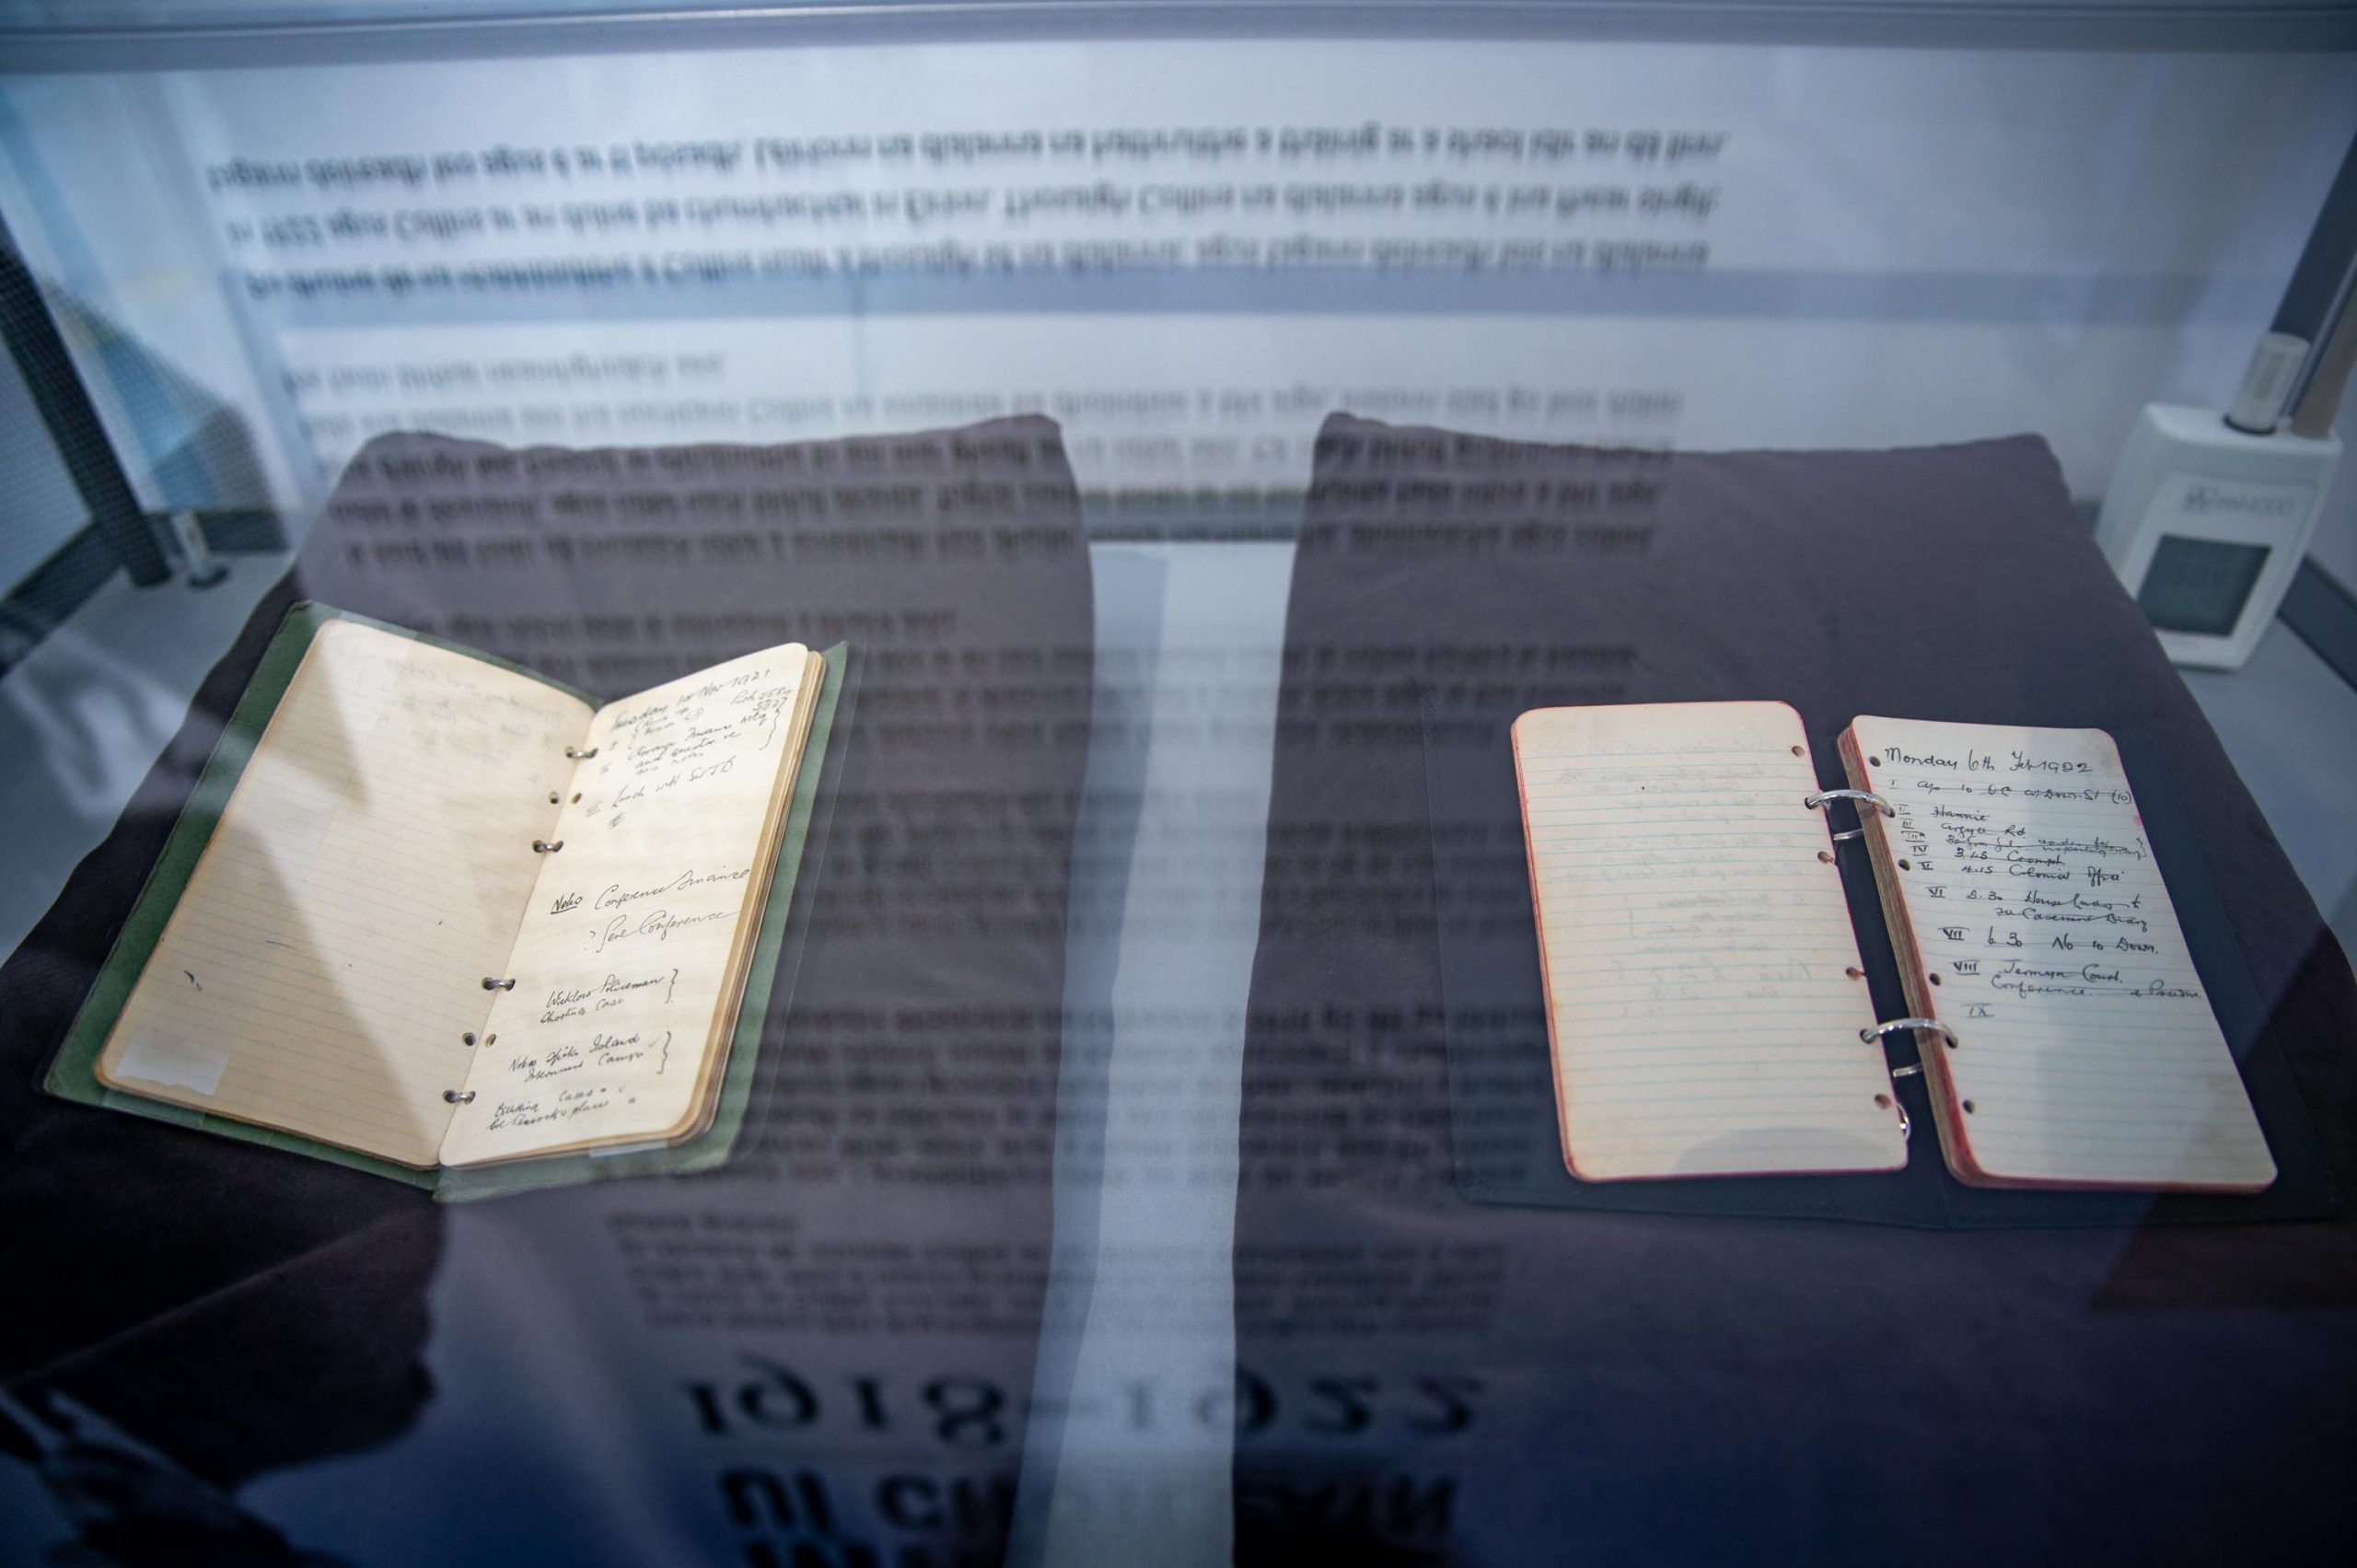 Diaries of Michael Collins Go On Public Display in Clonakilty